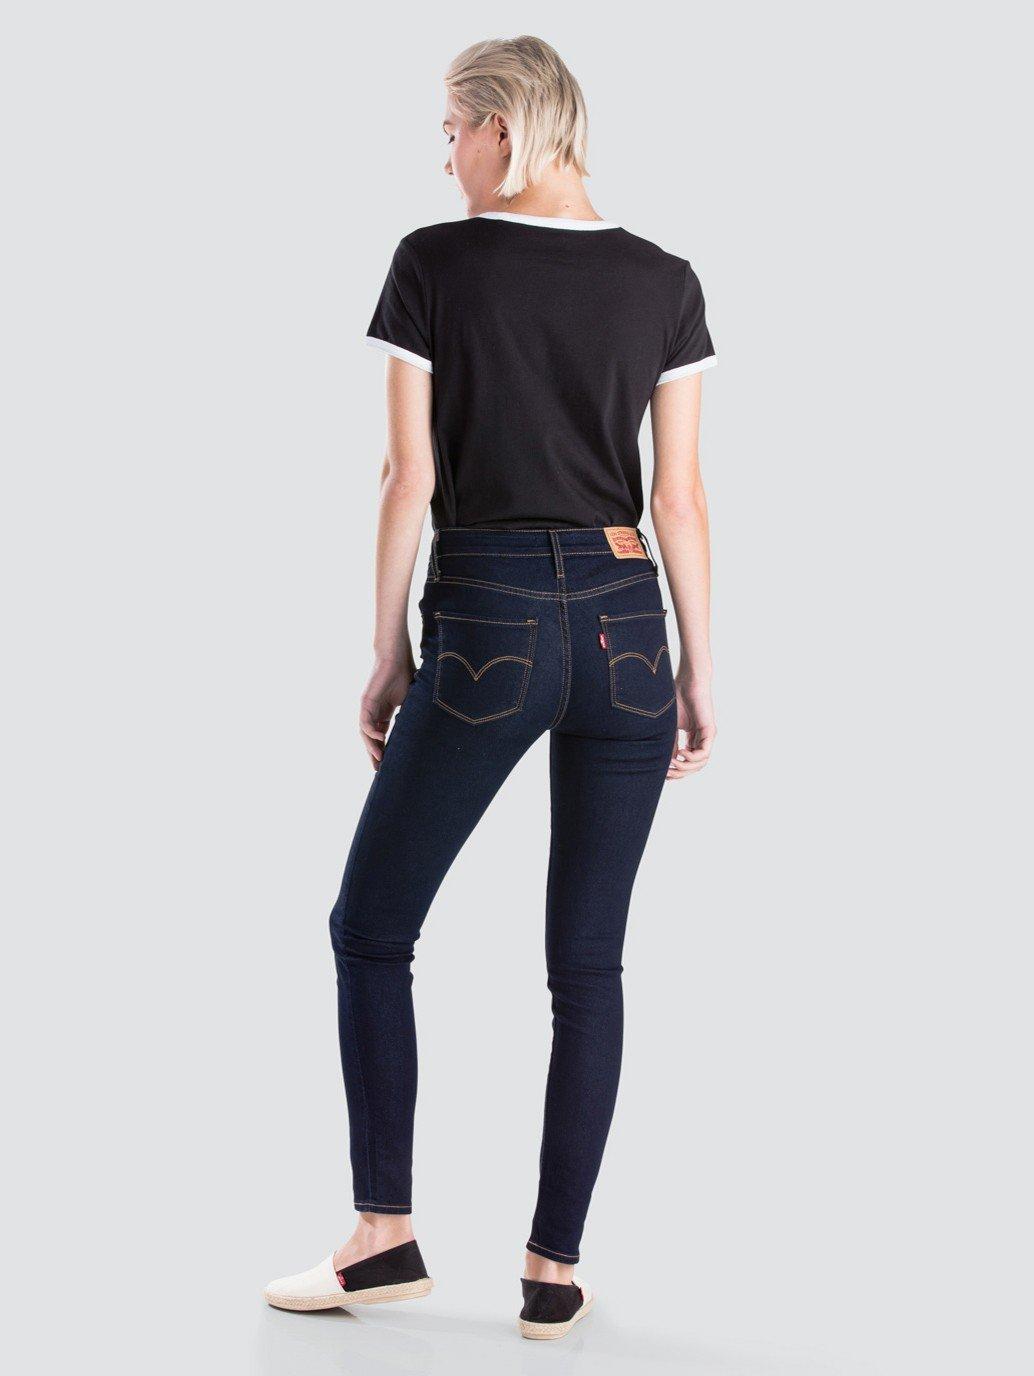 levis malaysia Levis 721 High Rise Skinny Jeans 188820023 02 Back